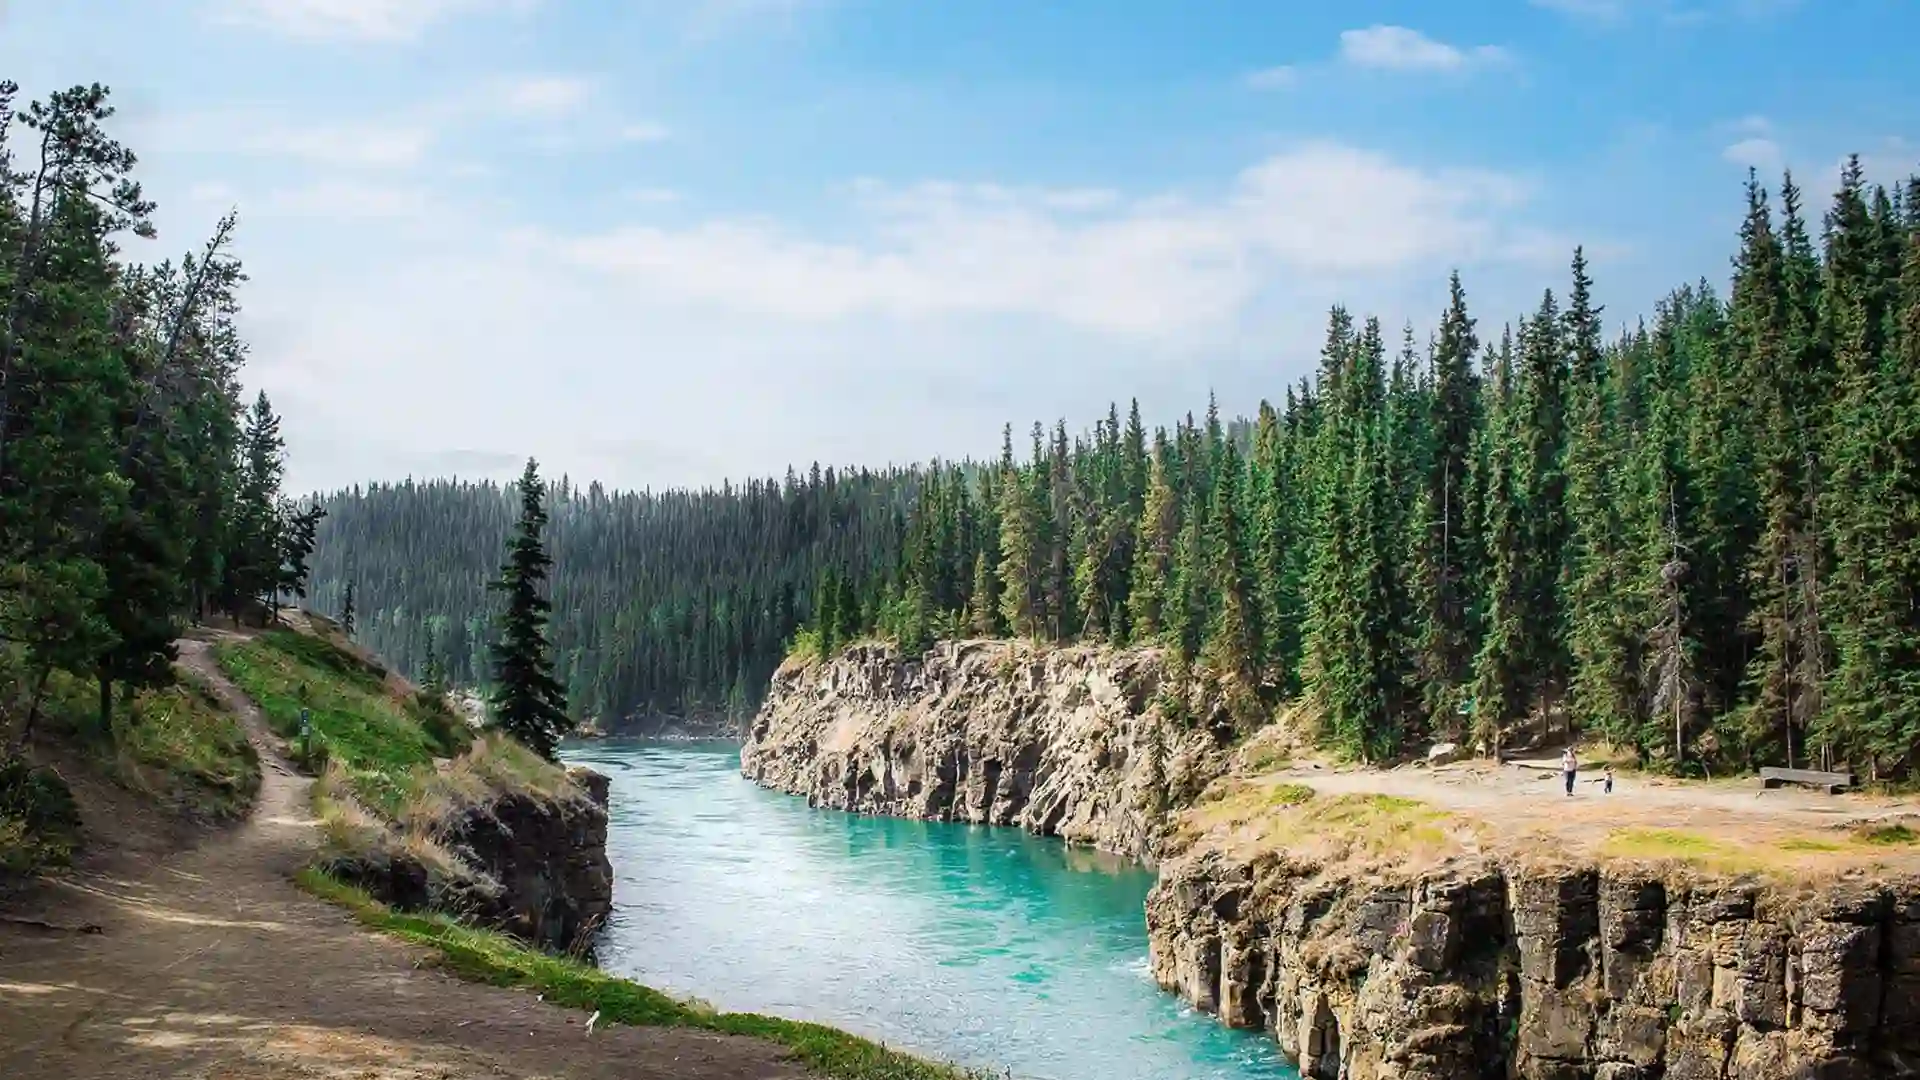 View of river surrounded by rocky and lush forest in Yukon Territory, Canada.